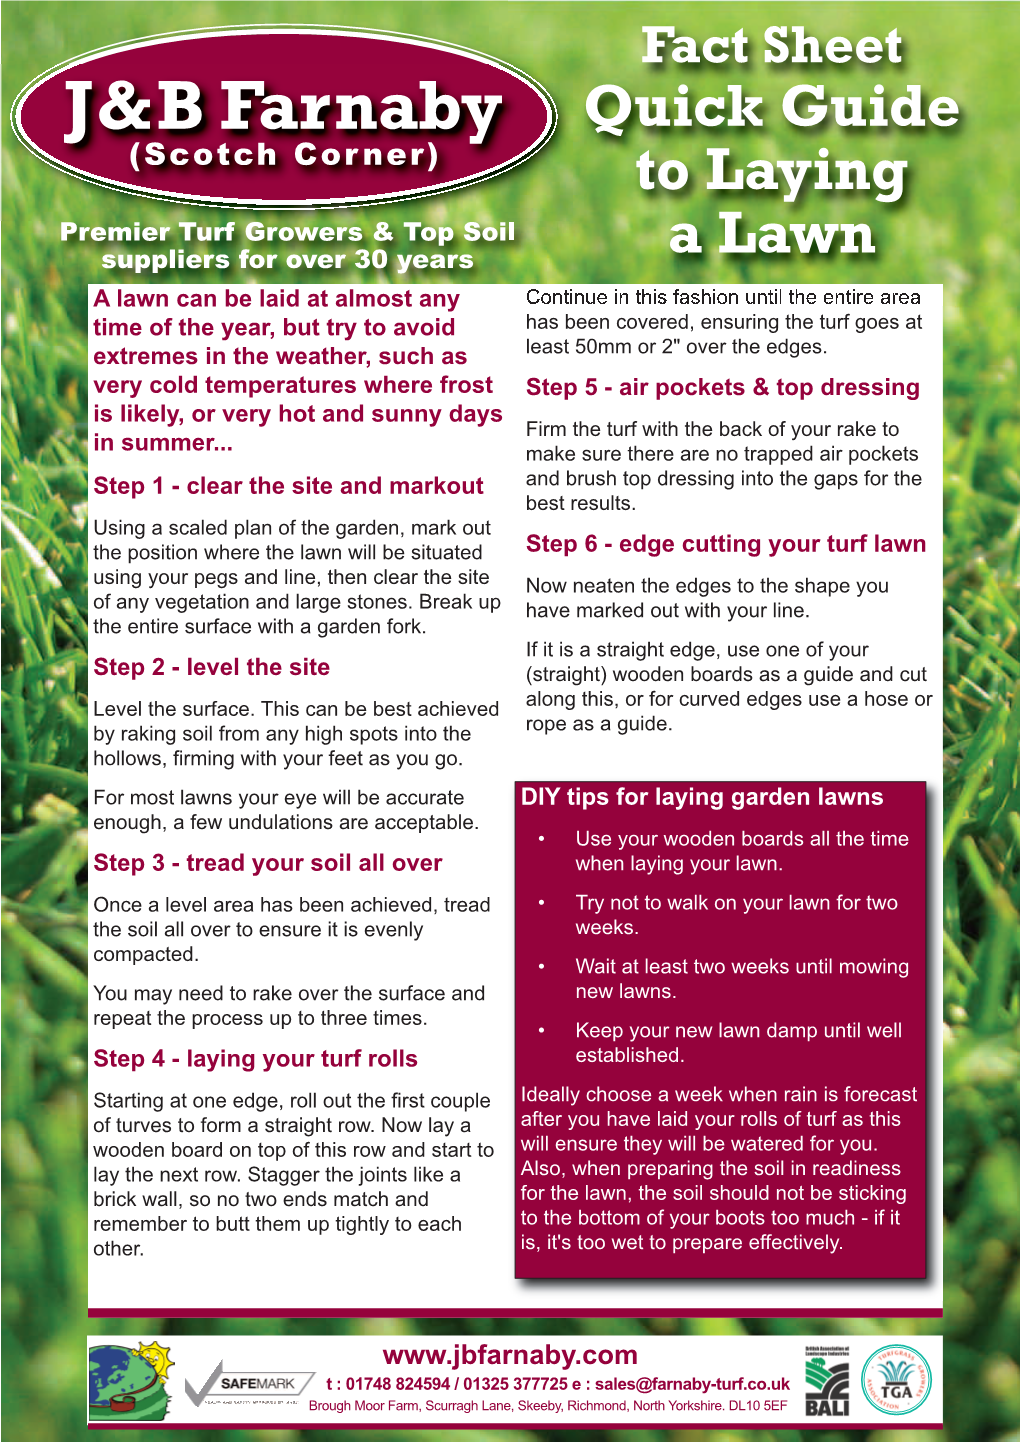 Quick Guide to Laying a Lawn